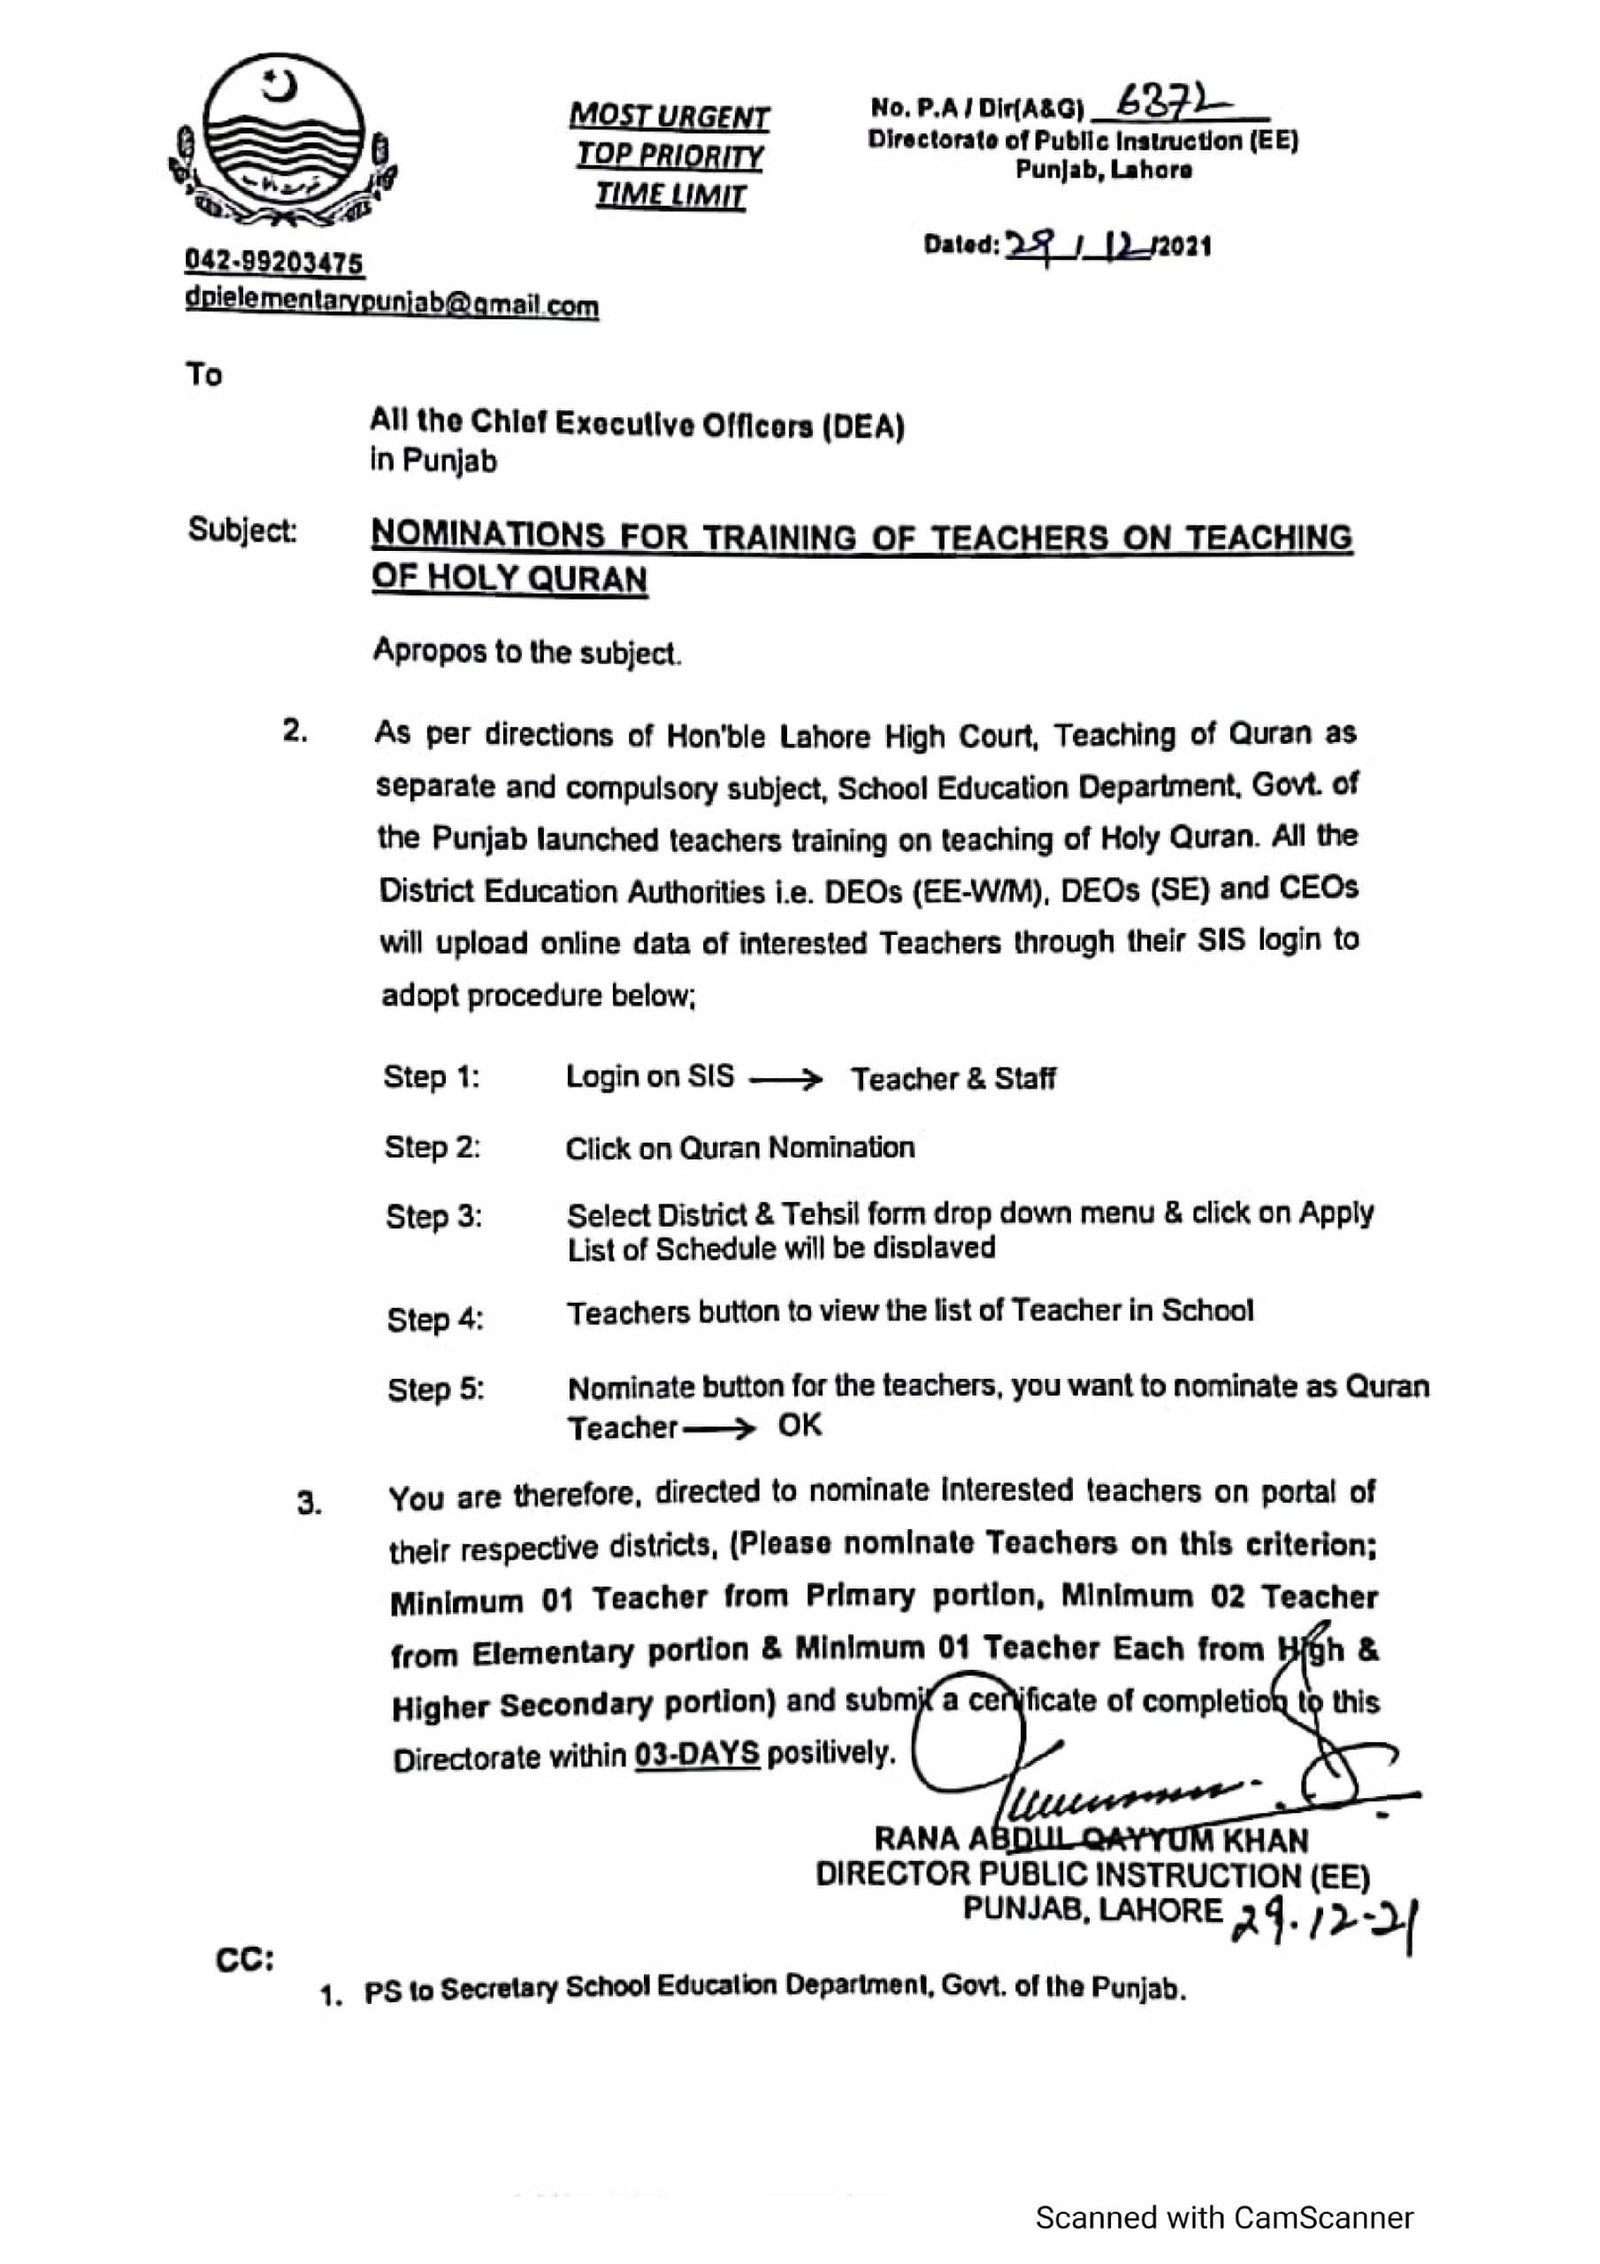 NOMINATIONS FOR TRAINING OF TEACHERS ON TEACHING OF HOLY QURAN ON SIS PORTAL